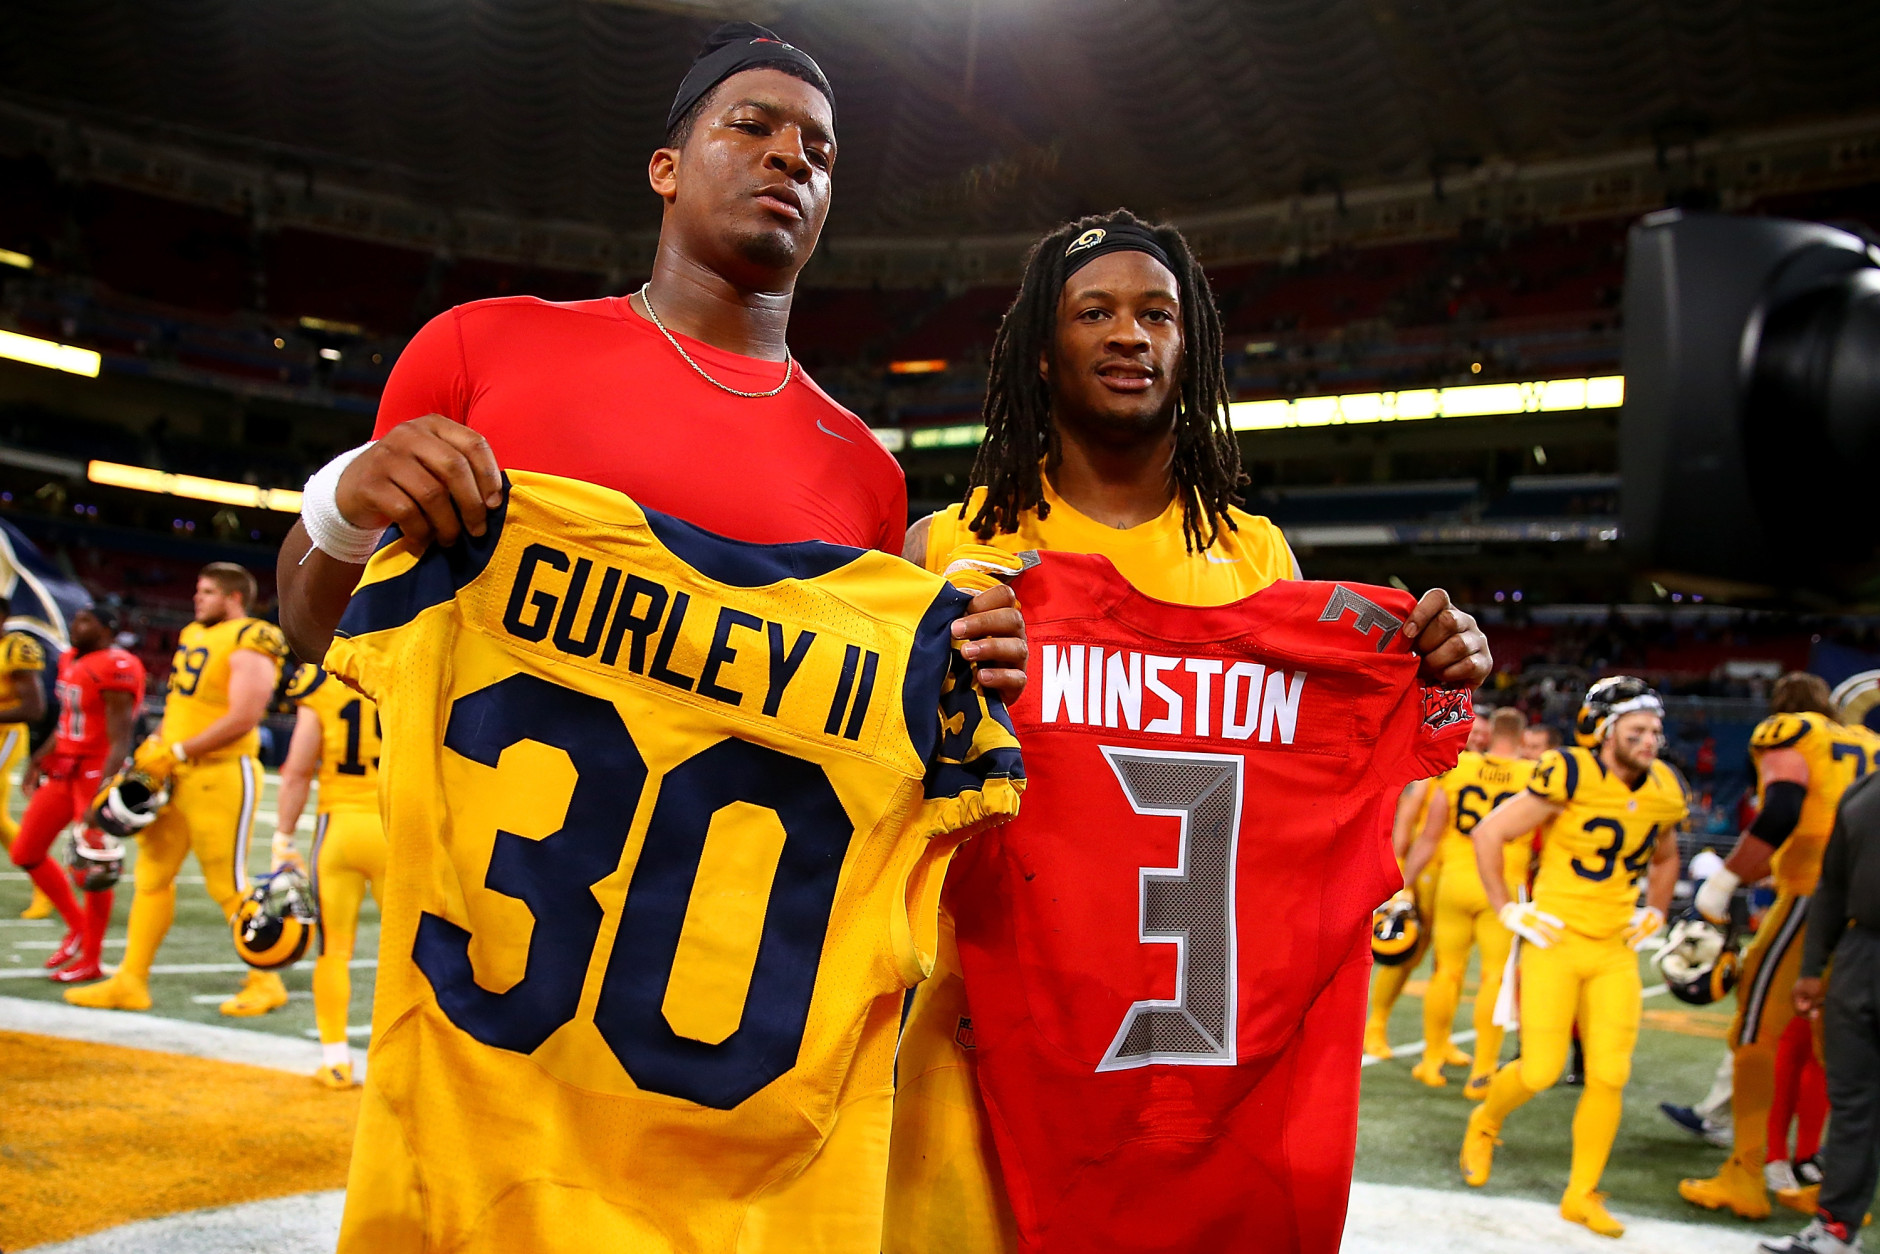 ST. LOUIS, MO - DECEMBER 17: Todd Gurley #30 of the St. Louis Rams and Jameis Winston #3 of the Tampa Bay Buccaneers pose after exchanging jerseys after a game at the Edward Jones Dome on December 17, 2015 in St. Louis, Missouri. (Photo by Dilip Vishwanat/Getty Images)